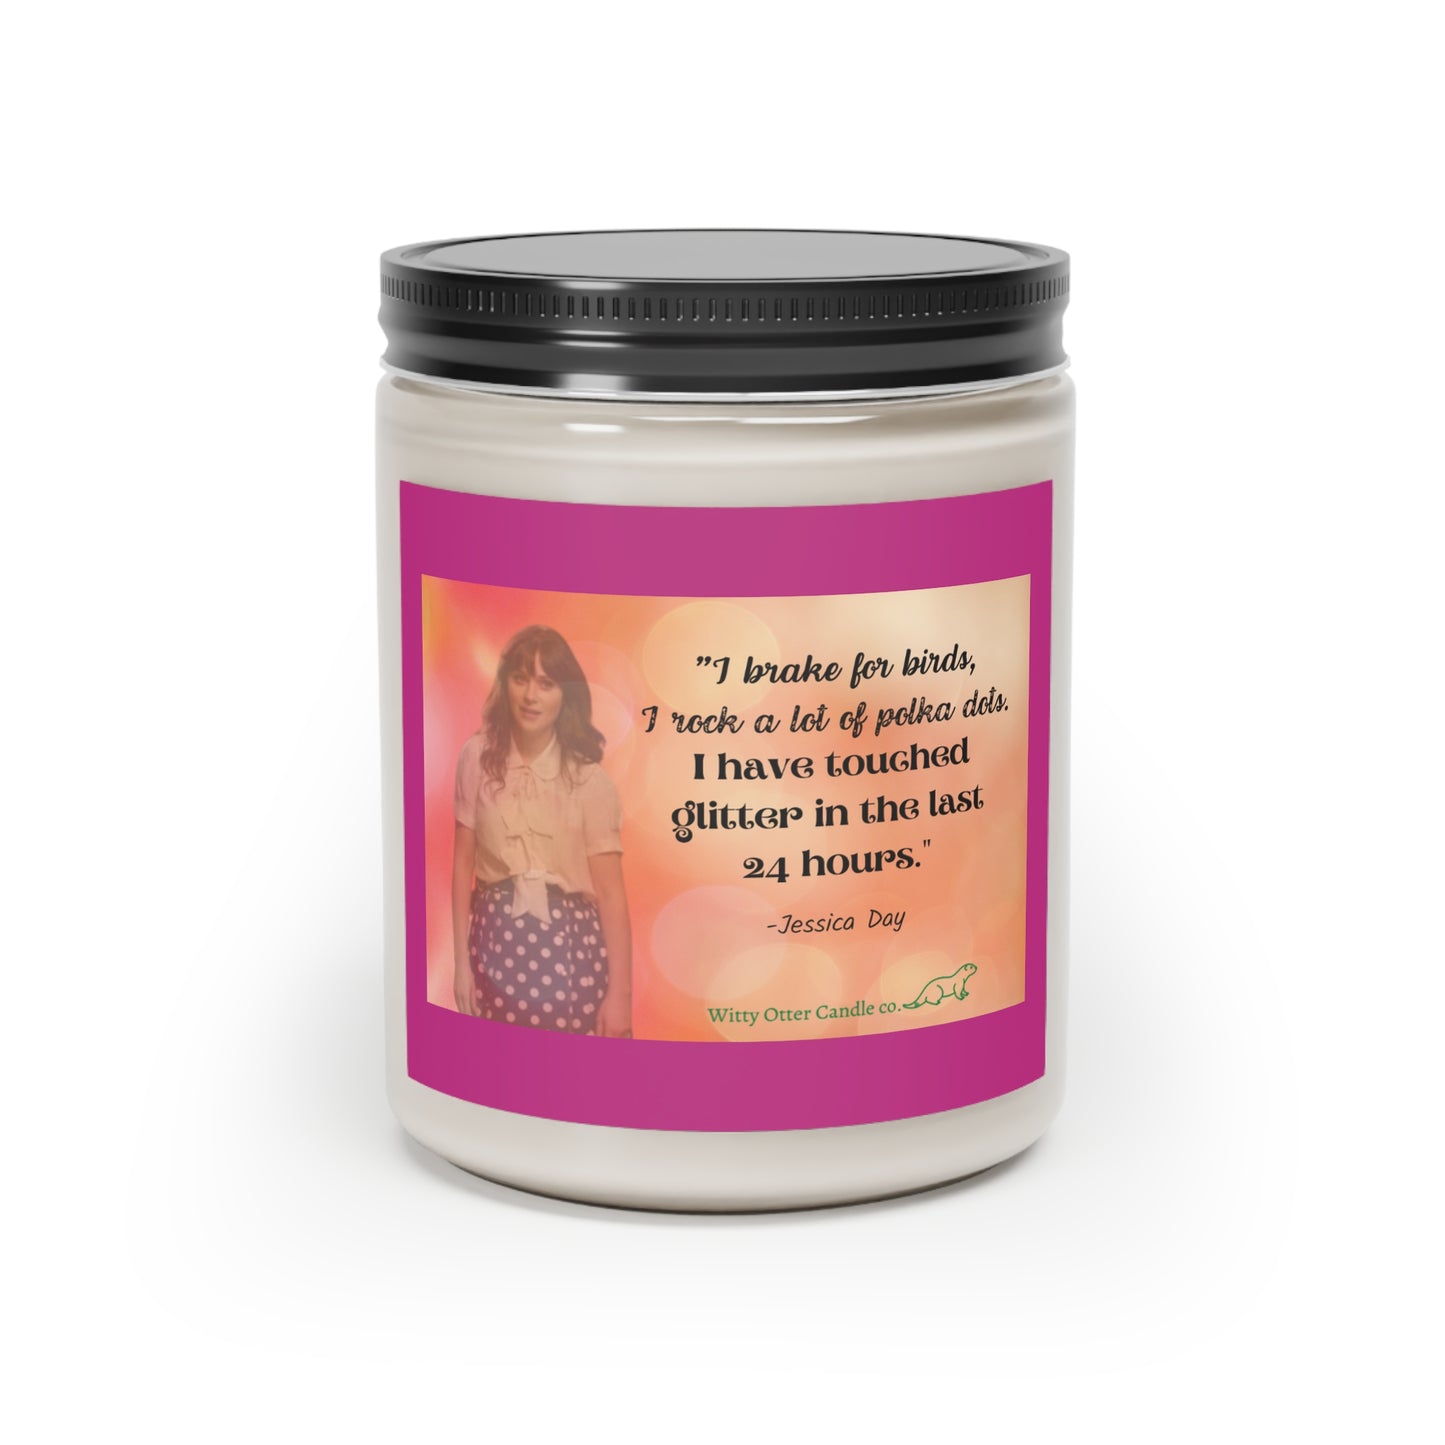 Jess Day "teacher" quote 9oz soy candle | New Girl show candle